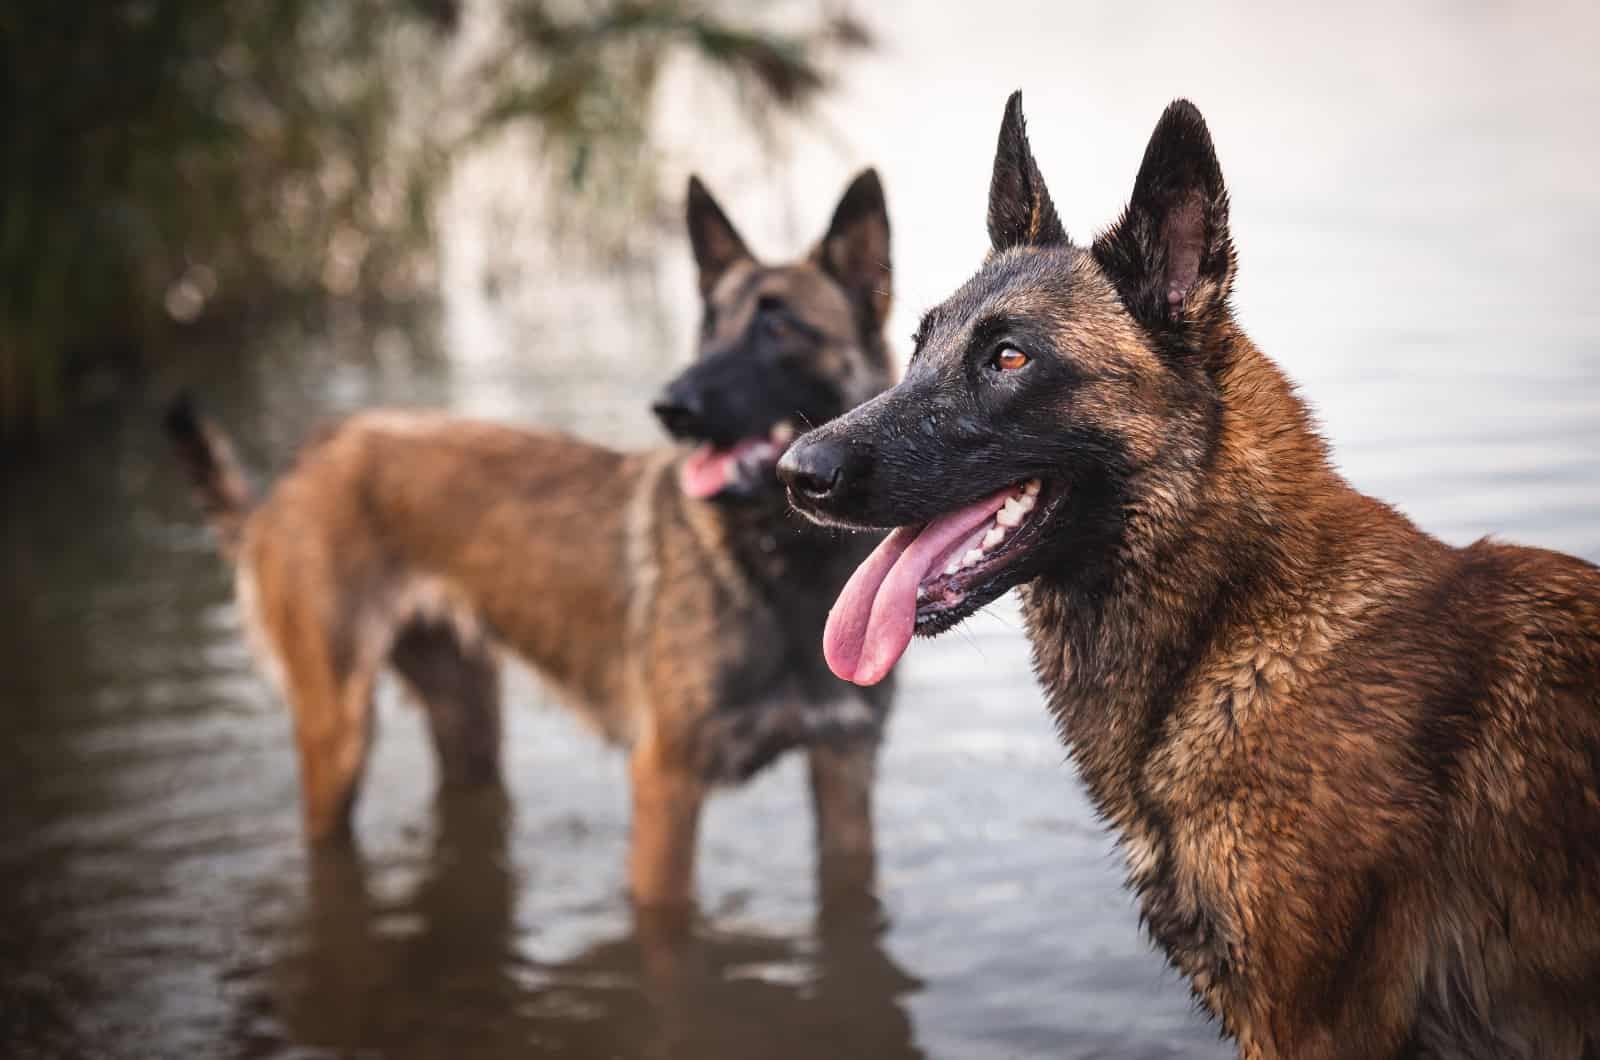 Belgian Malinois dogs standing in water